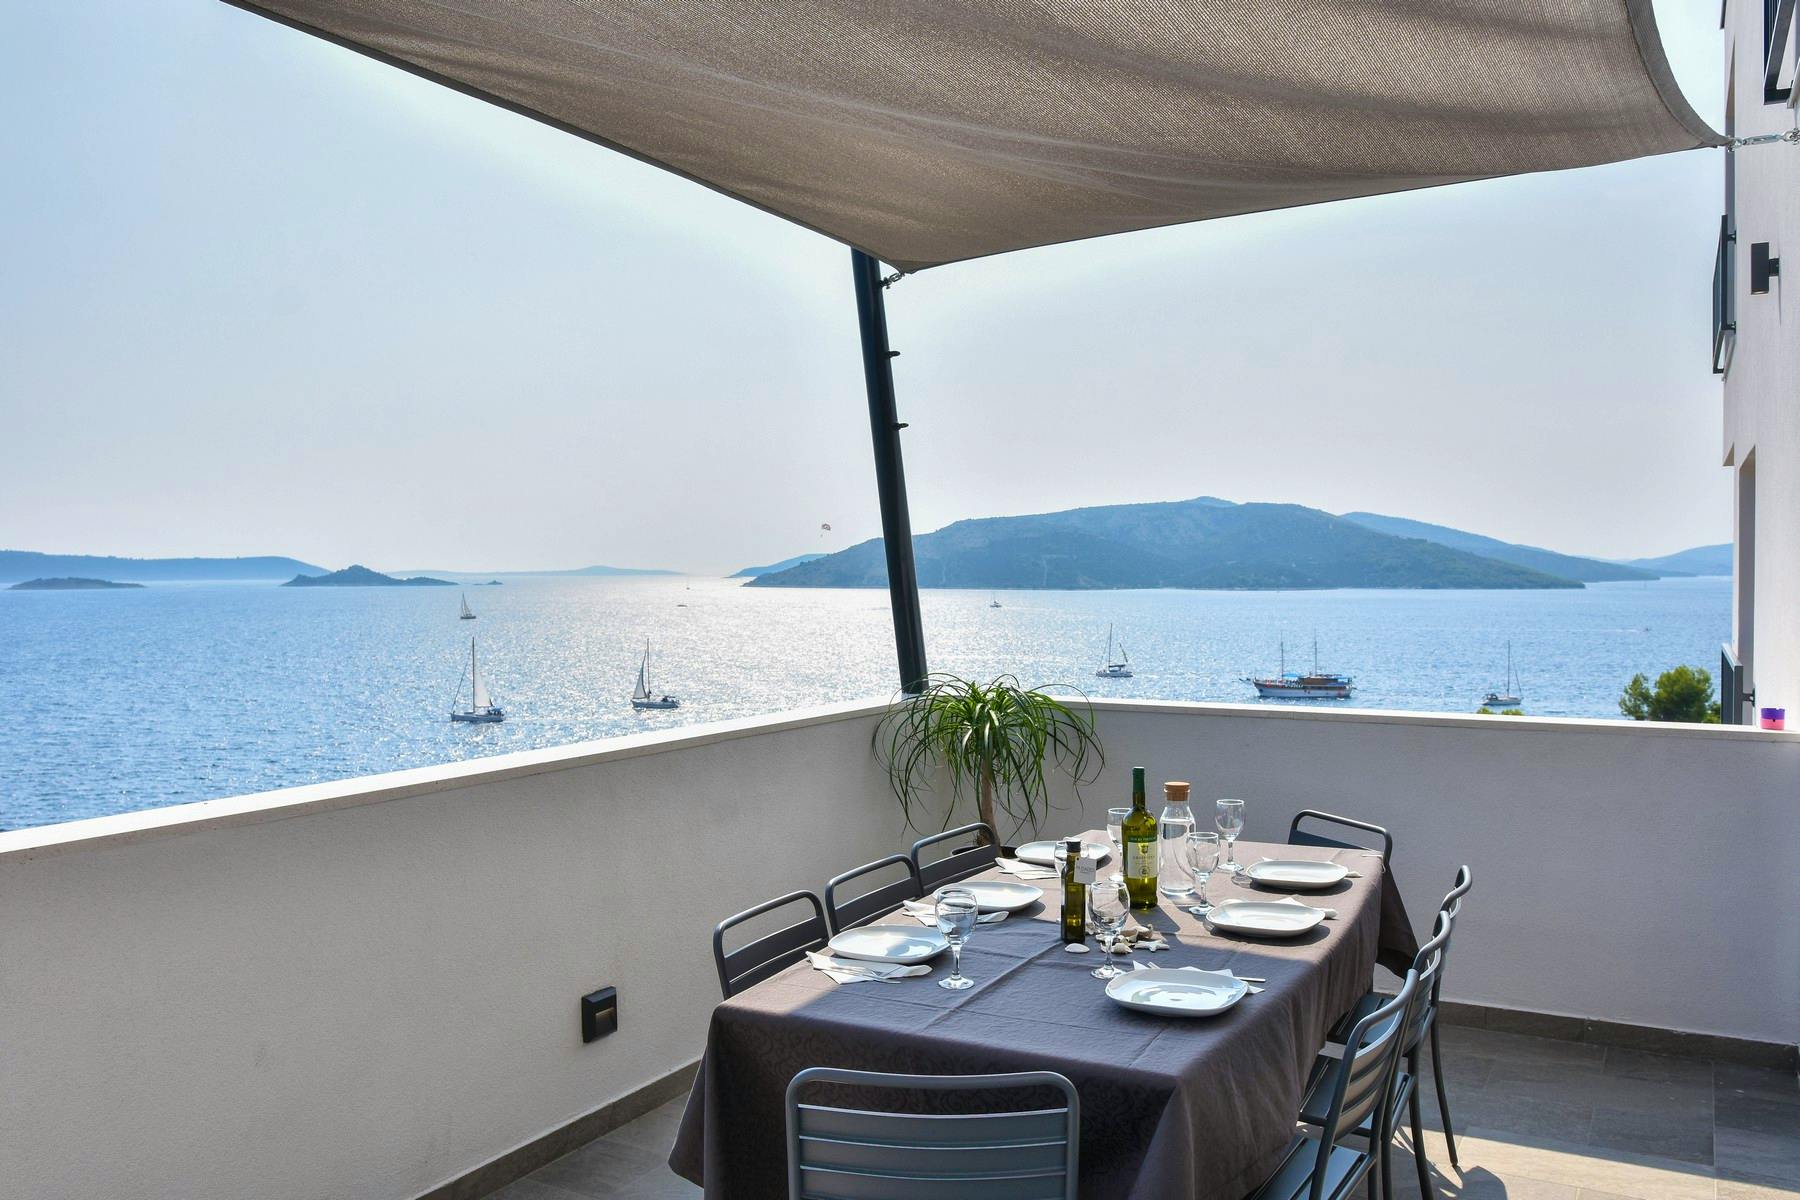 Outdoor dining area offering picturesque sea view